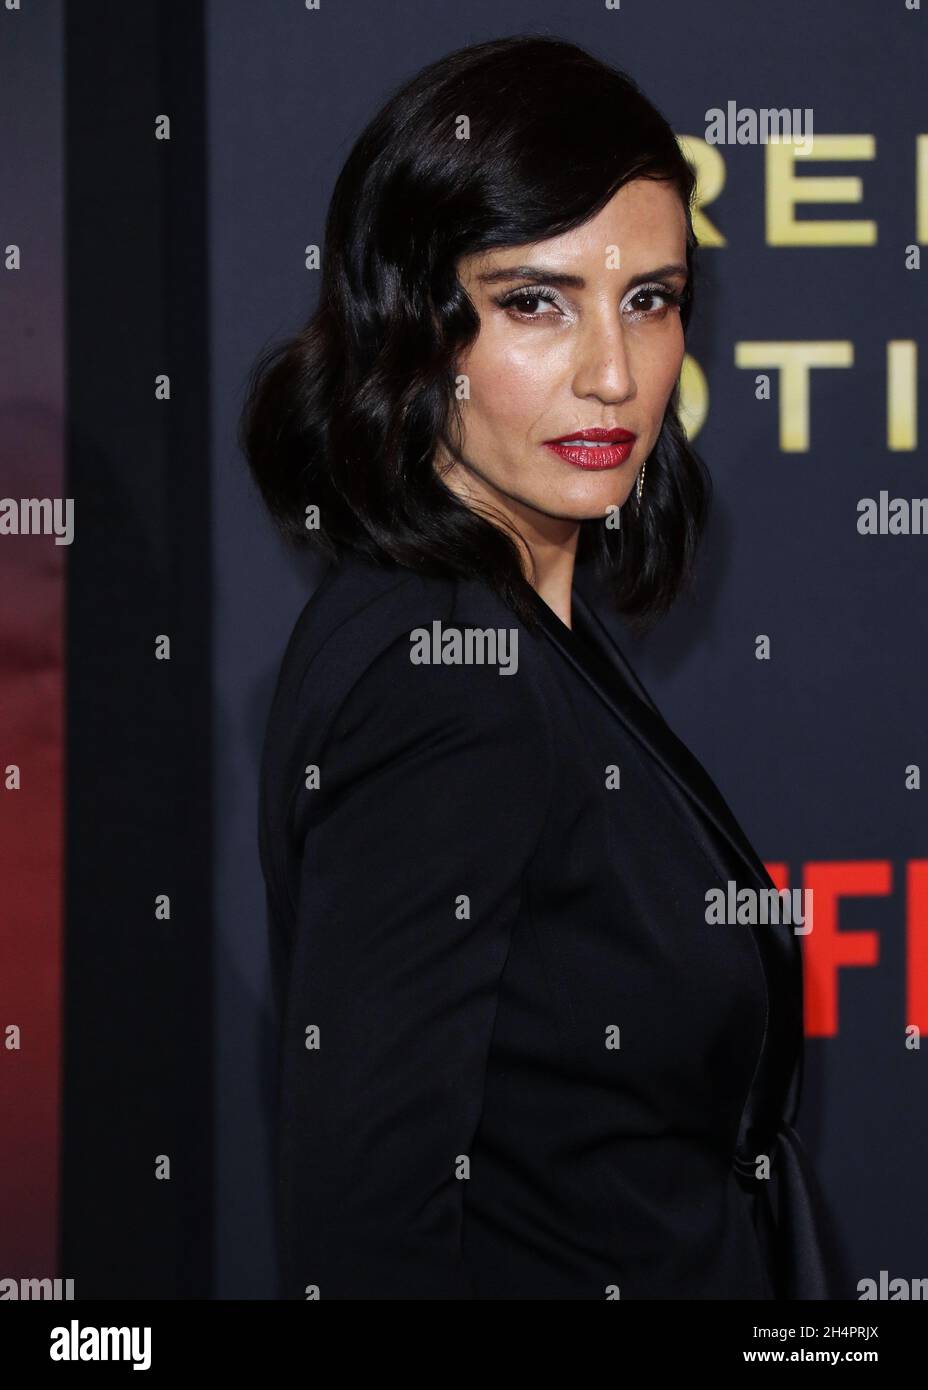 Los Angeles, United States. 03rd Nov, 2021. LOS ANGELES, CALIFORNIA, USA - NOVEMBER 04: Actress Leonor Varela arrives at the World Premiere Of Netflix's 'Red Notice' held at the Xbox Plaza and Chick Hearn Court at L.A. Live on November 4, 2021 in Los Angeles, California, United States. (Photo by Xavier Collin/Image Press Agency/Sipa USA) Credit: Sipa USA/Alamy Live News Stock Photo